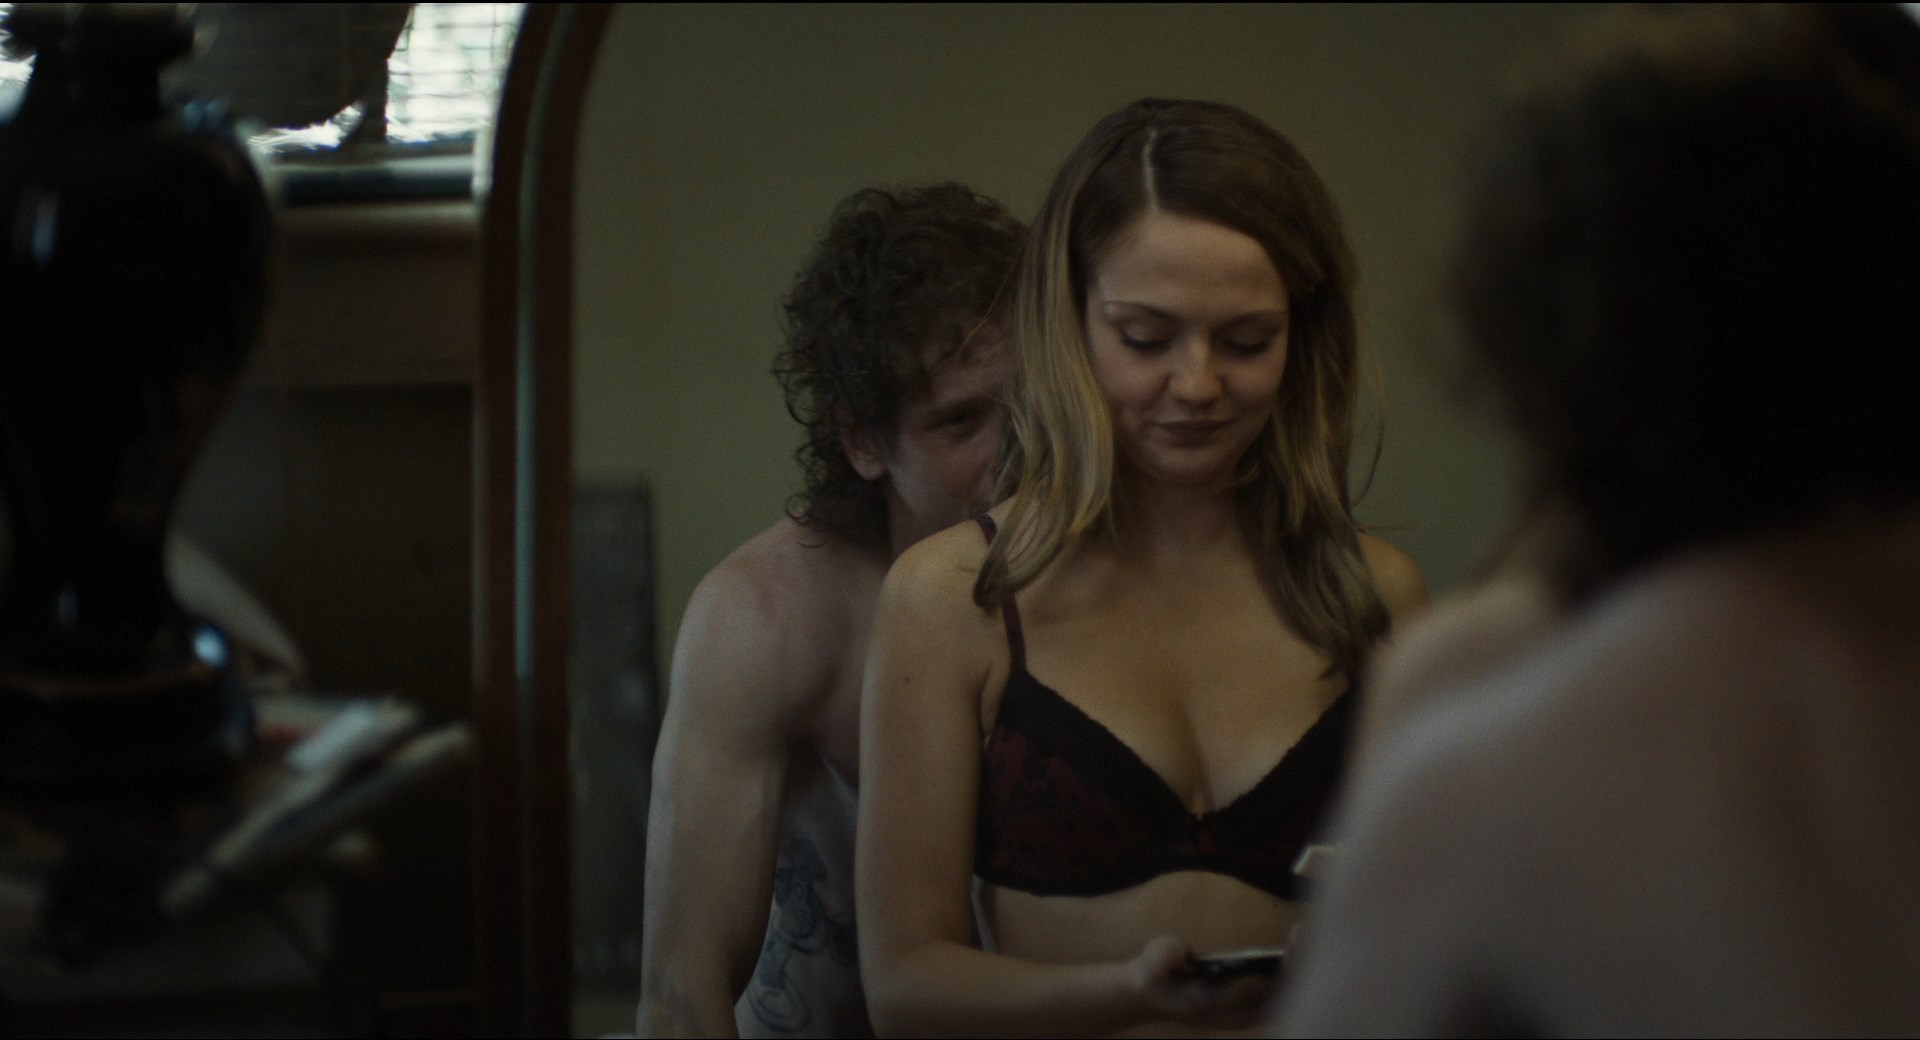 Emily Meade shows her tits while putting on a bra.